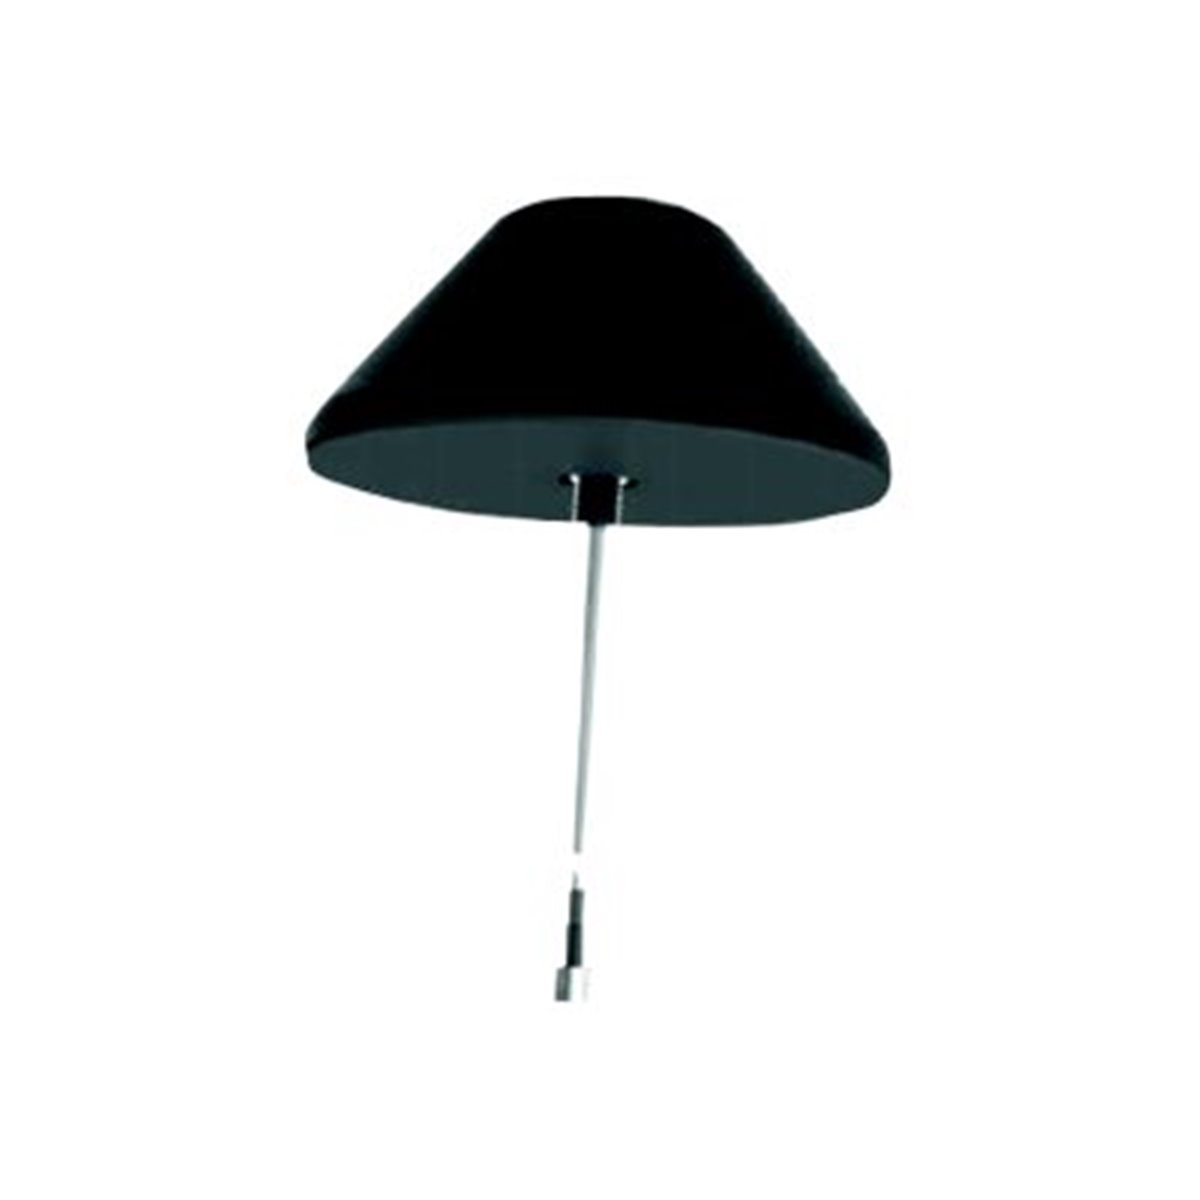 MULTIBAND LOW-PROFILE SAUCER-OUTDOOR 4G ANTENNA